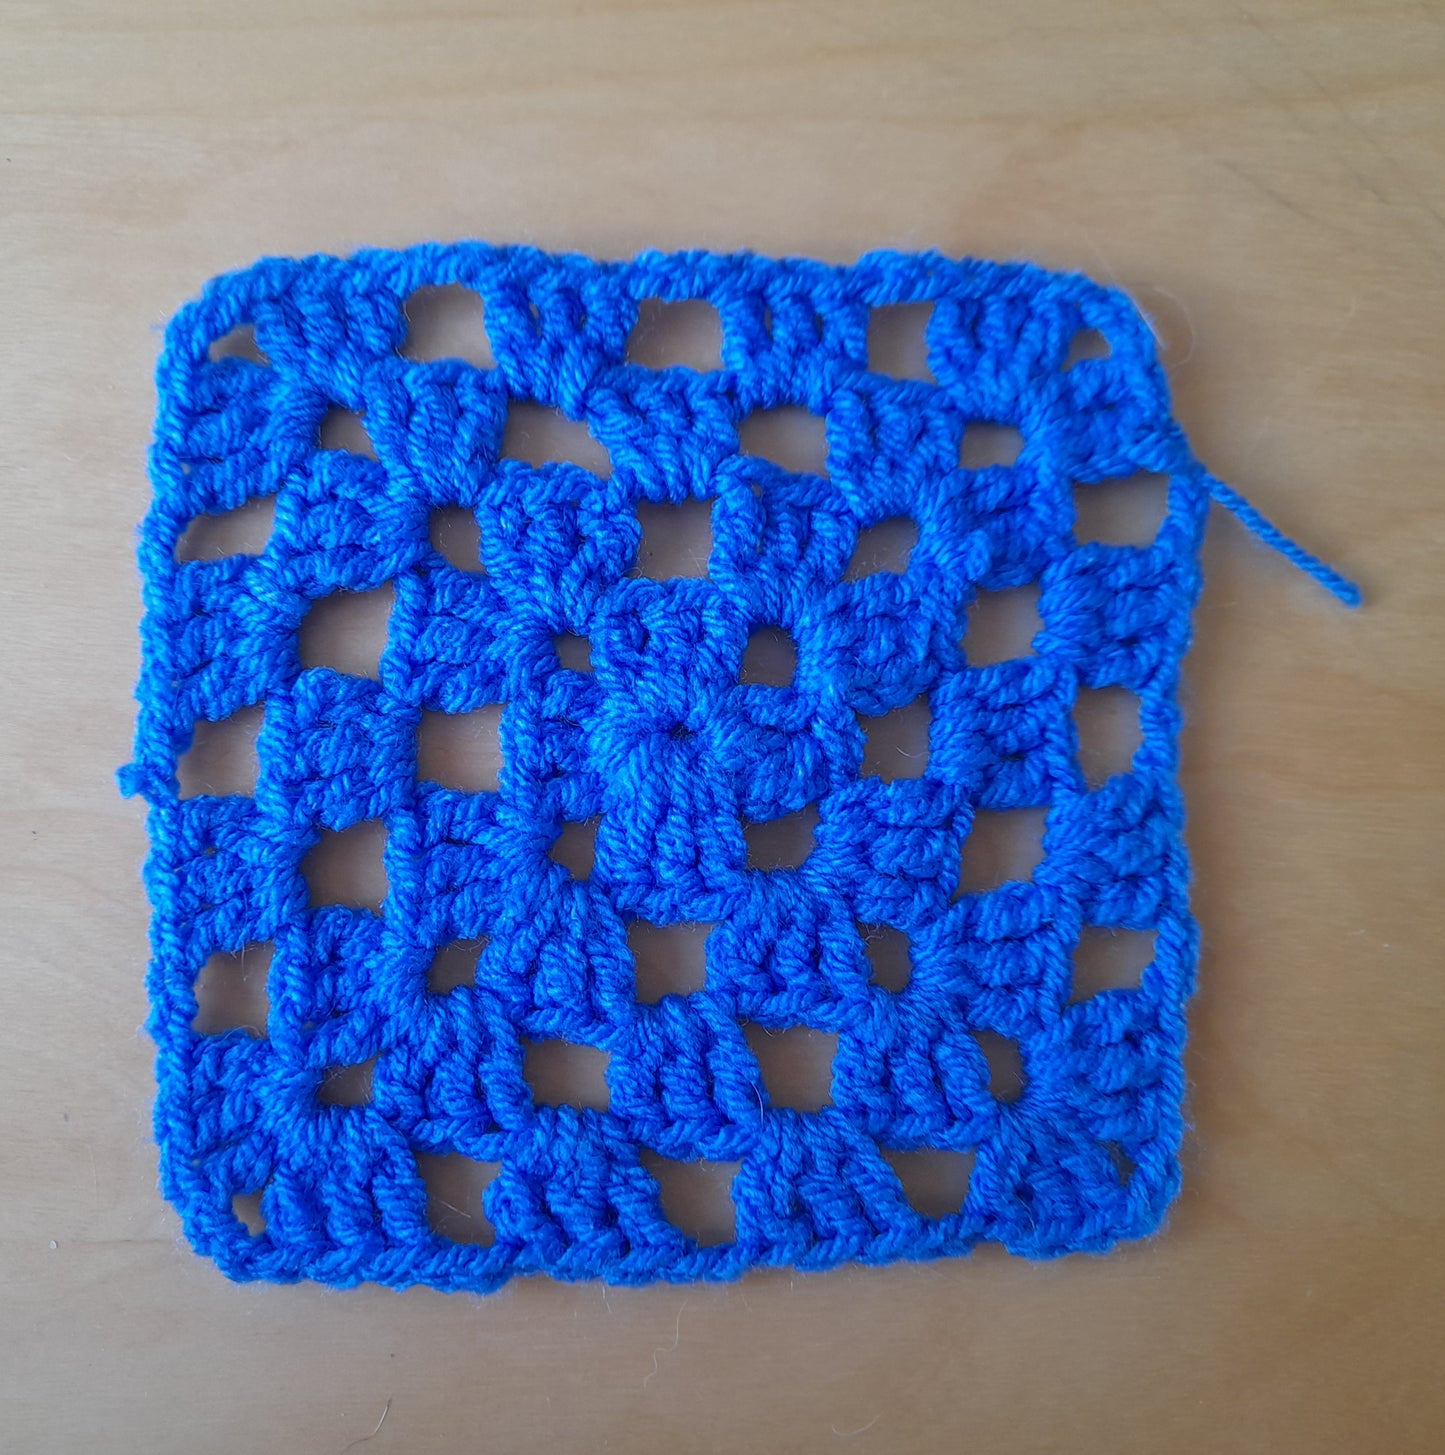 Granny square basic pattern with tutorial for beginners 